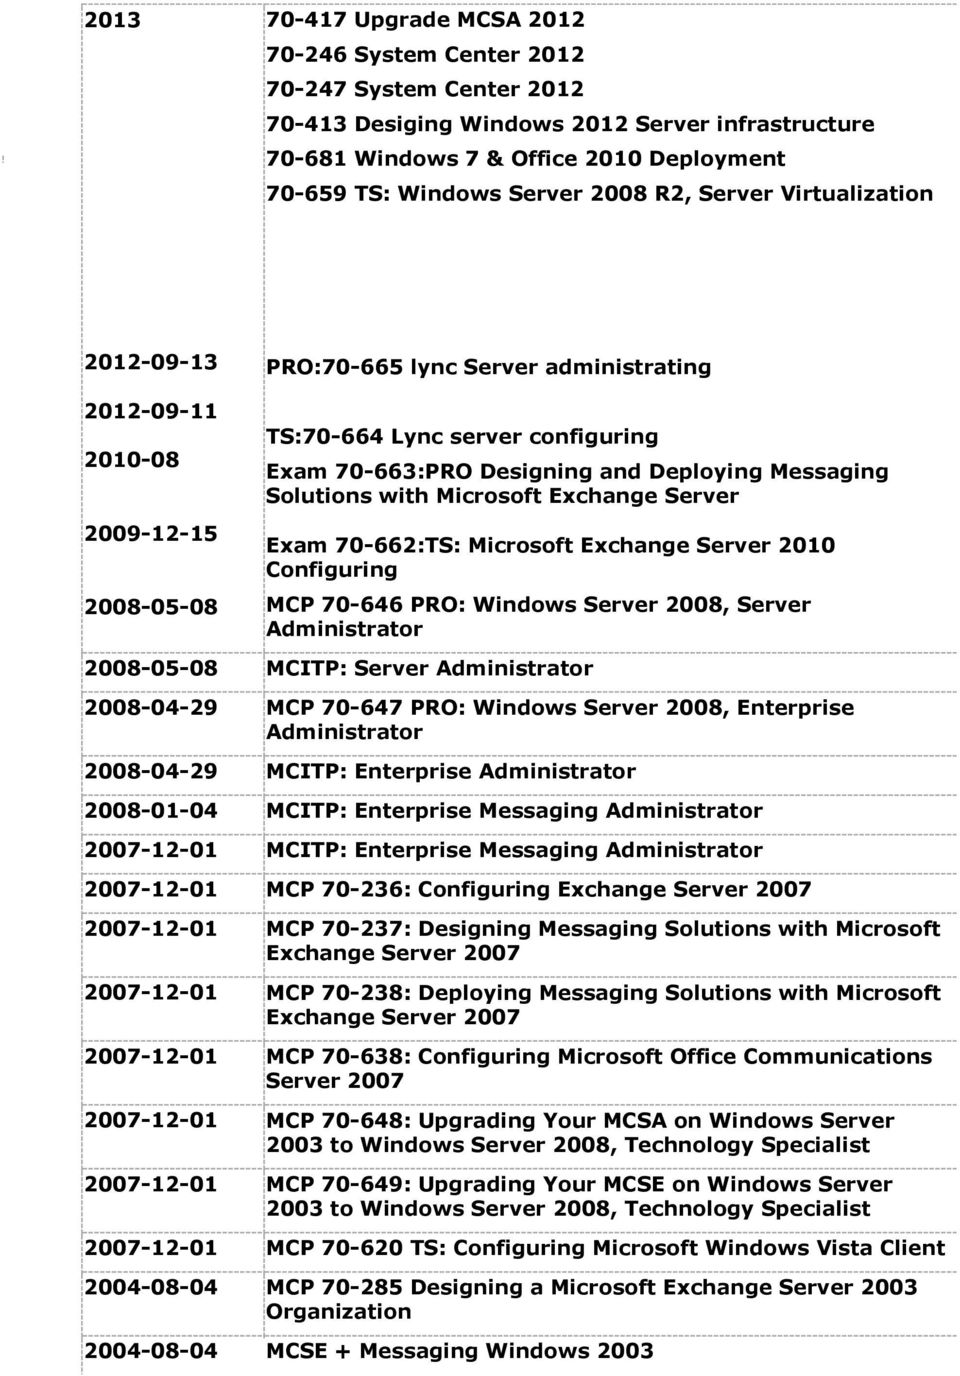 Deploying Messaging Solutions with Microsoft Exchange Server Exam 70-662:TS: Microsoft Exchange Server 2010 Configuring MCP 70-646 PRO: Windows Server 2008, Server Administrator 2008-05-08 MCITP: